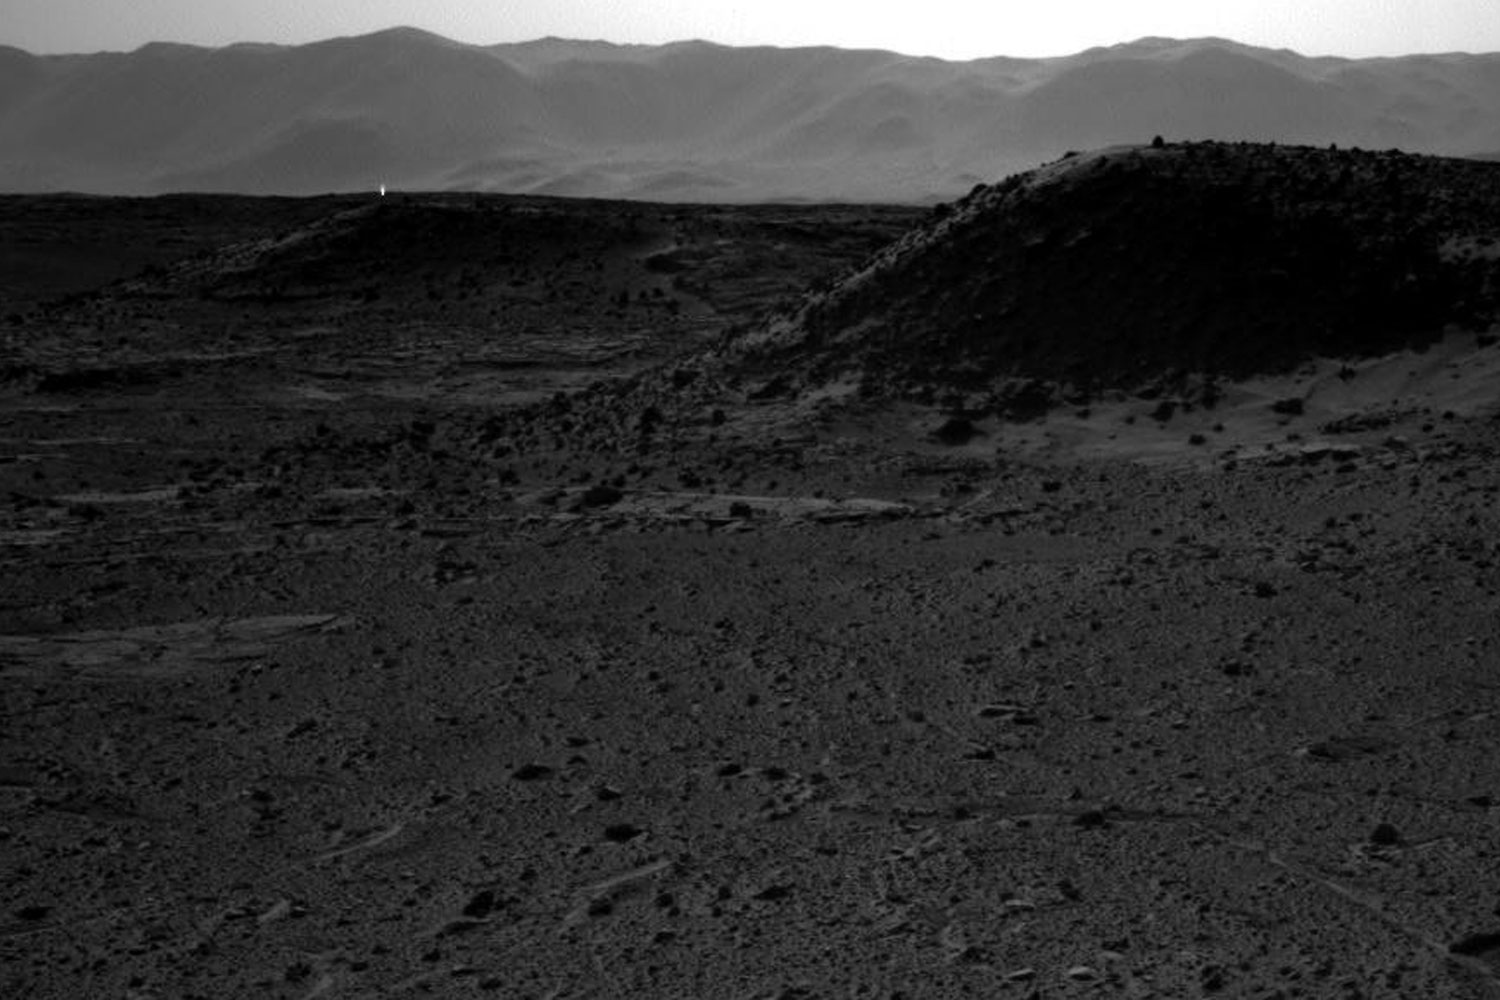 This image taken by the right eye of NASA's Curiosity Mars rover's stereoscopic camera, on April 3, 2014, includes a bright spot, upper left, which might be due to the sun glinting off a rock or cosmic rays striking the camera's detector. Bright spots appear in images from the rover nearly every week.